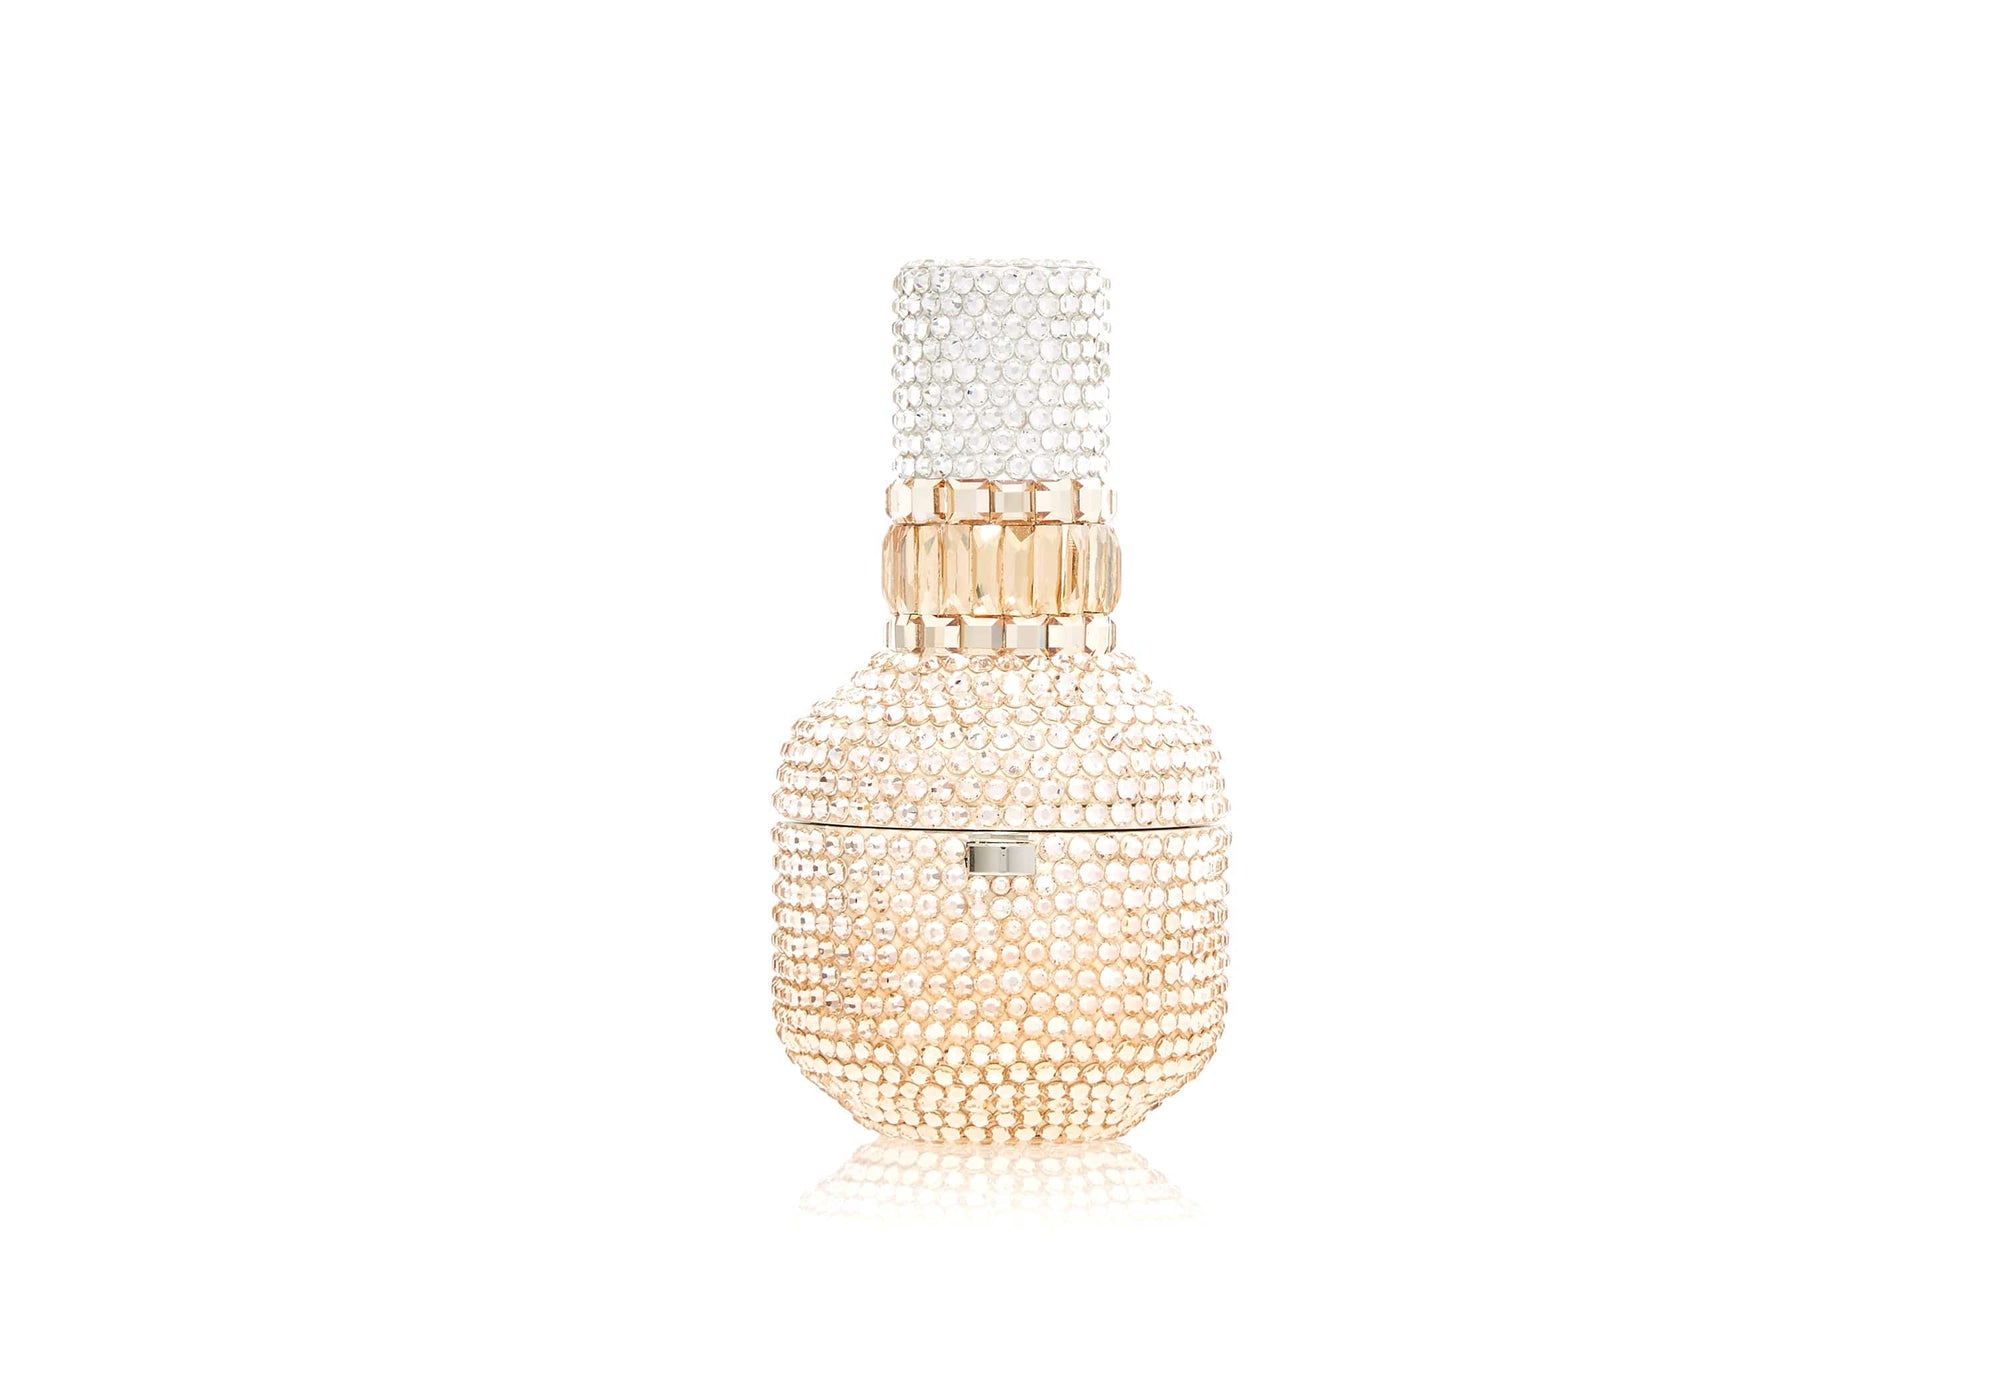 Judith Leiber Couture Pineapple Crystal Pillbox, Champagne, Women's, Clutches & Small Handbags Pillboxes